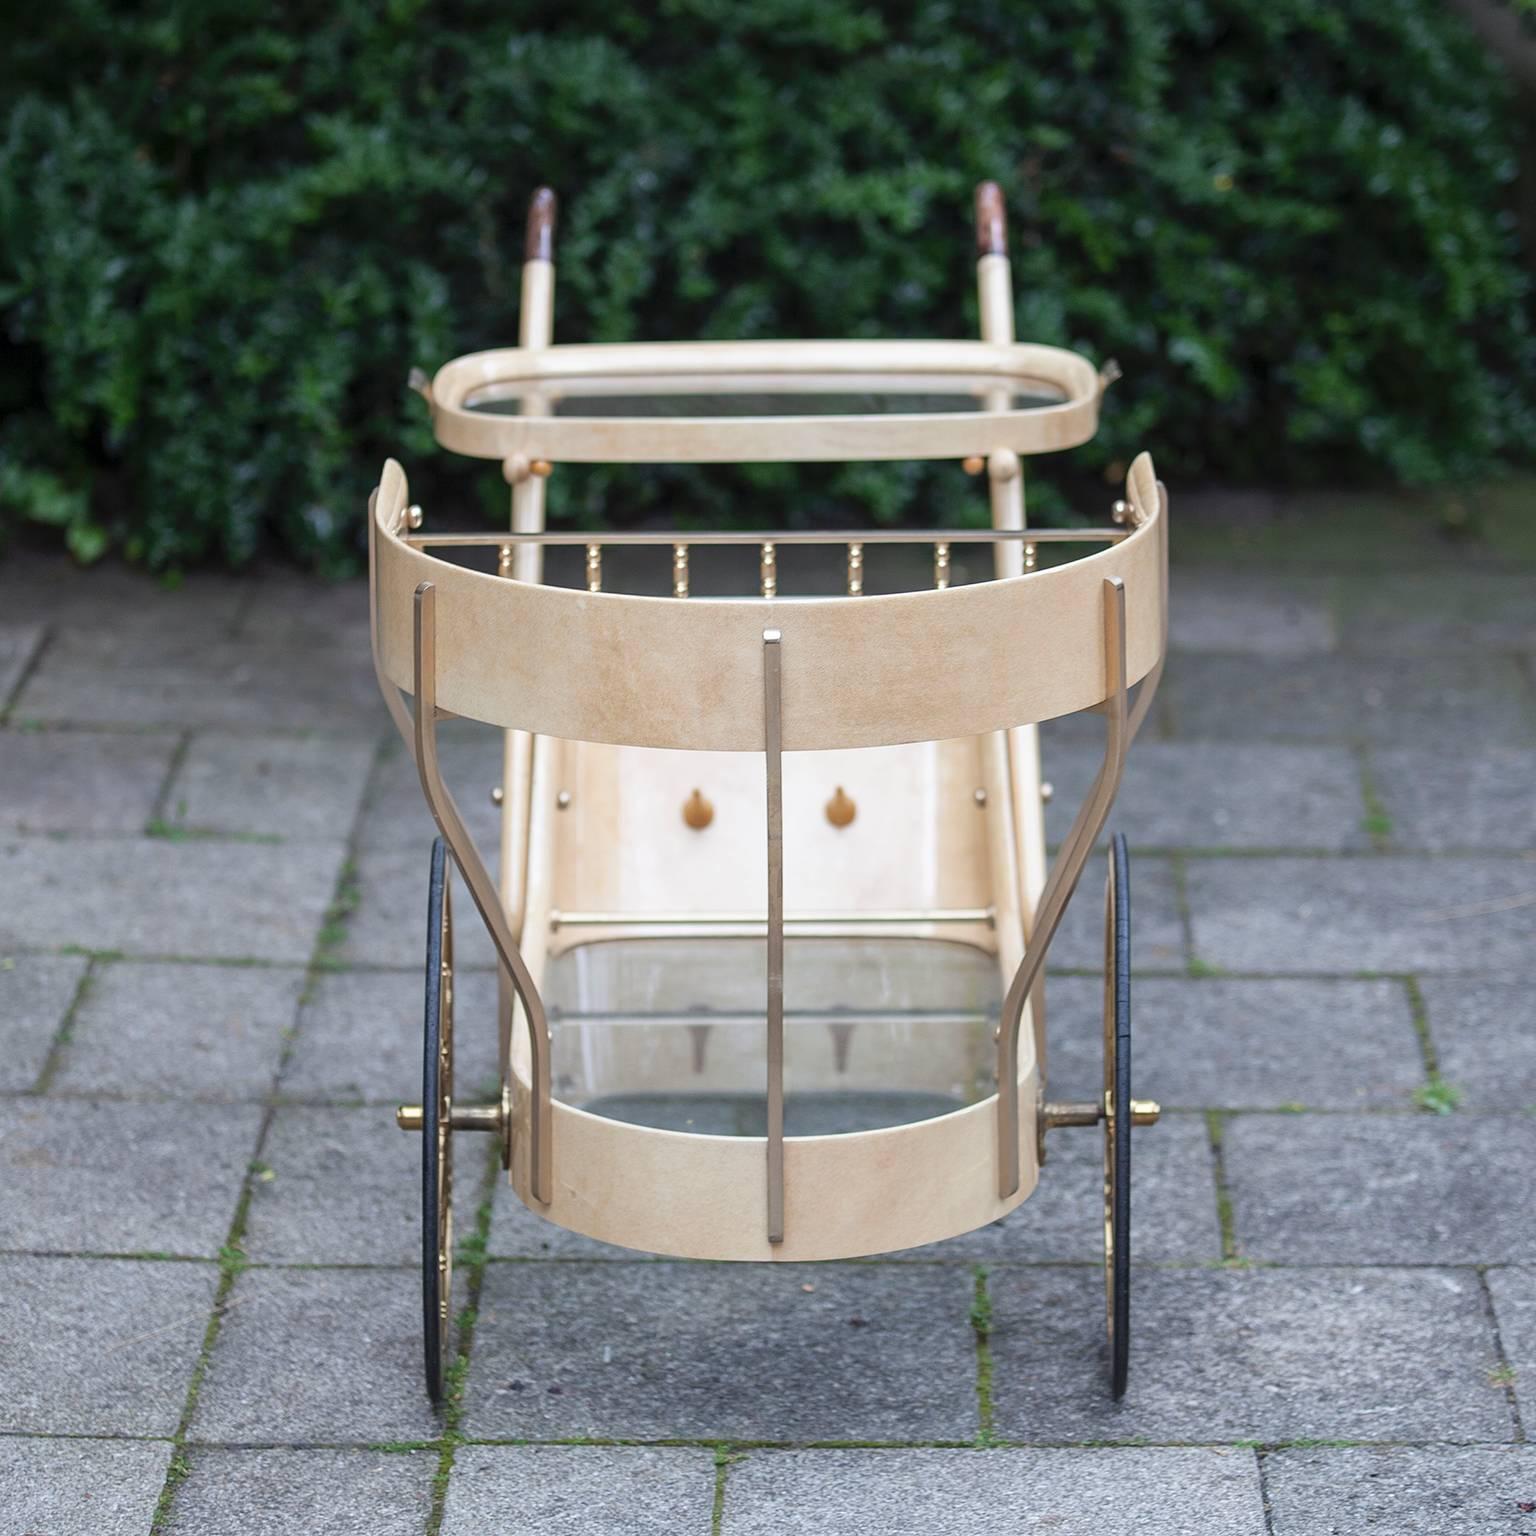 Gorgeous Aldo Tura Hollywood Regency style bar or serving cart by Aldo Tura, Milano, Italy, 1965. Creme lacquered goatskin bar or serving cart with two glass tops and serving tray with brass handles. Original brass wheels and brass applications.